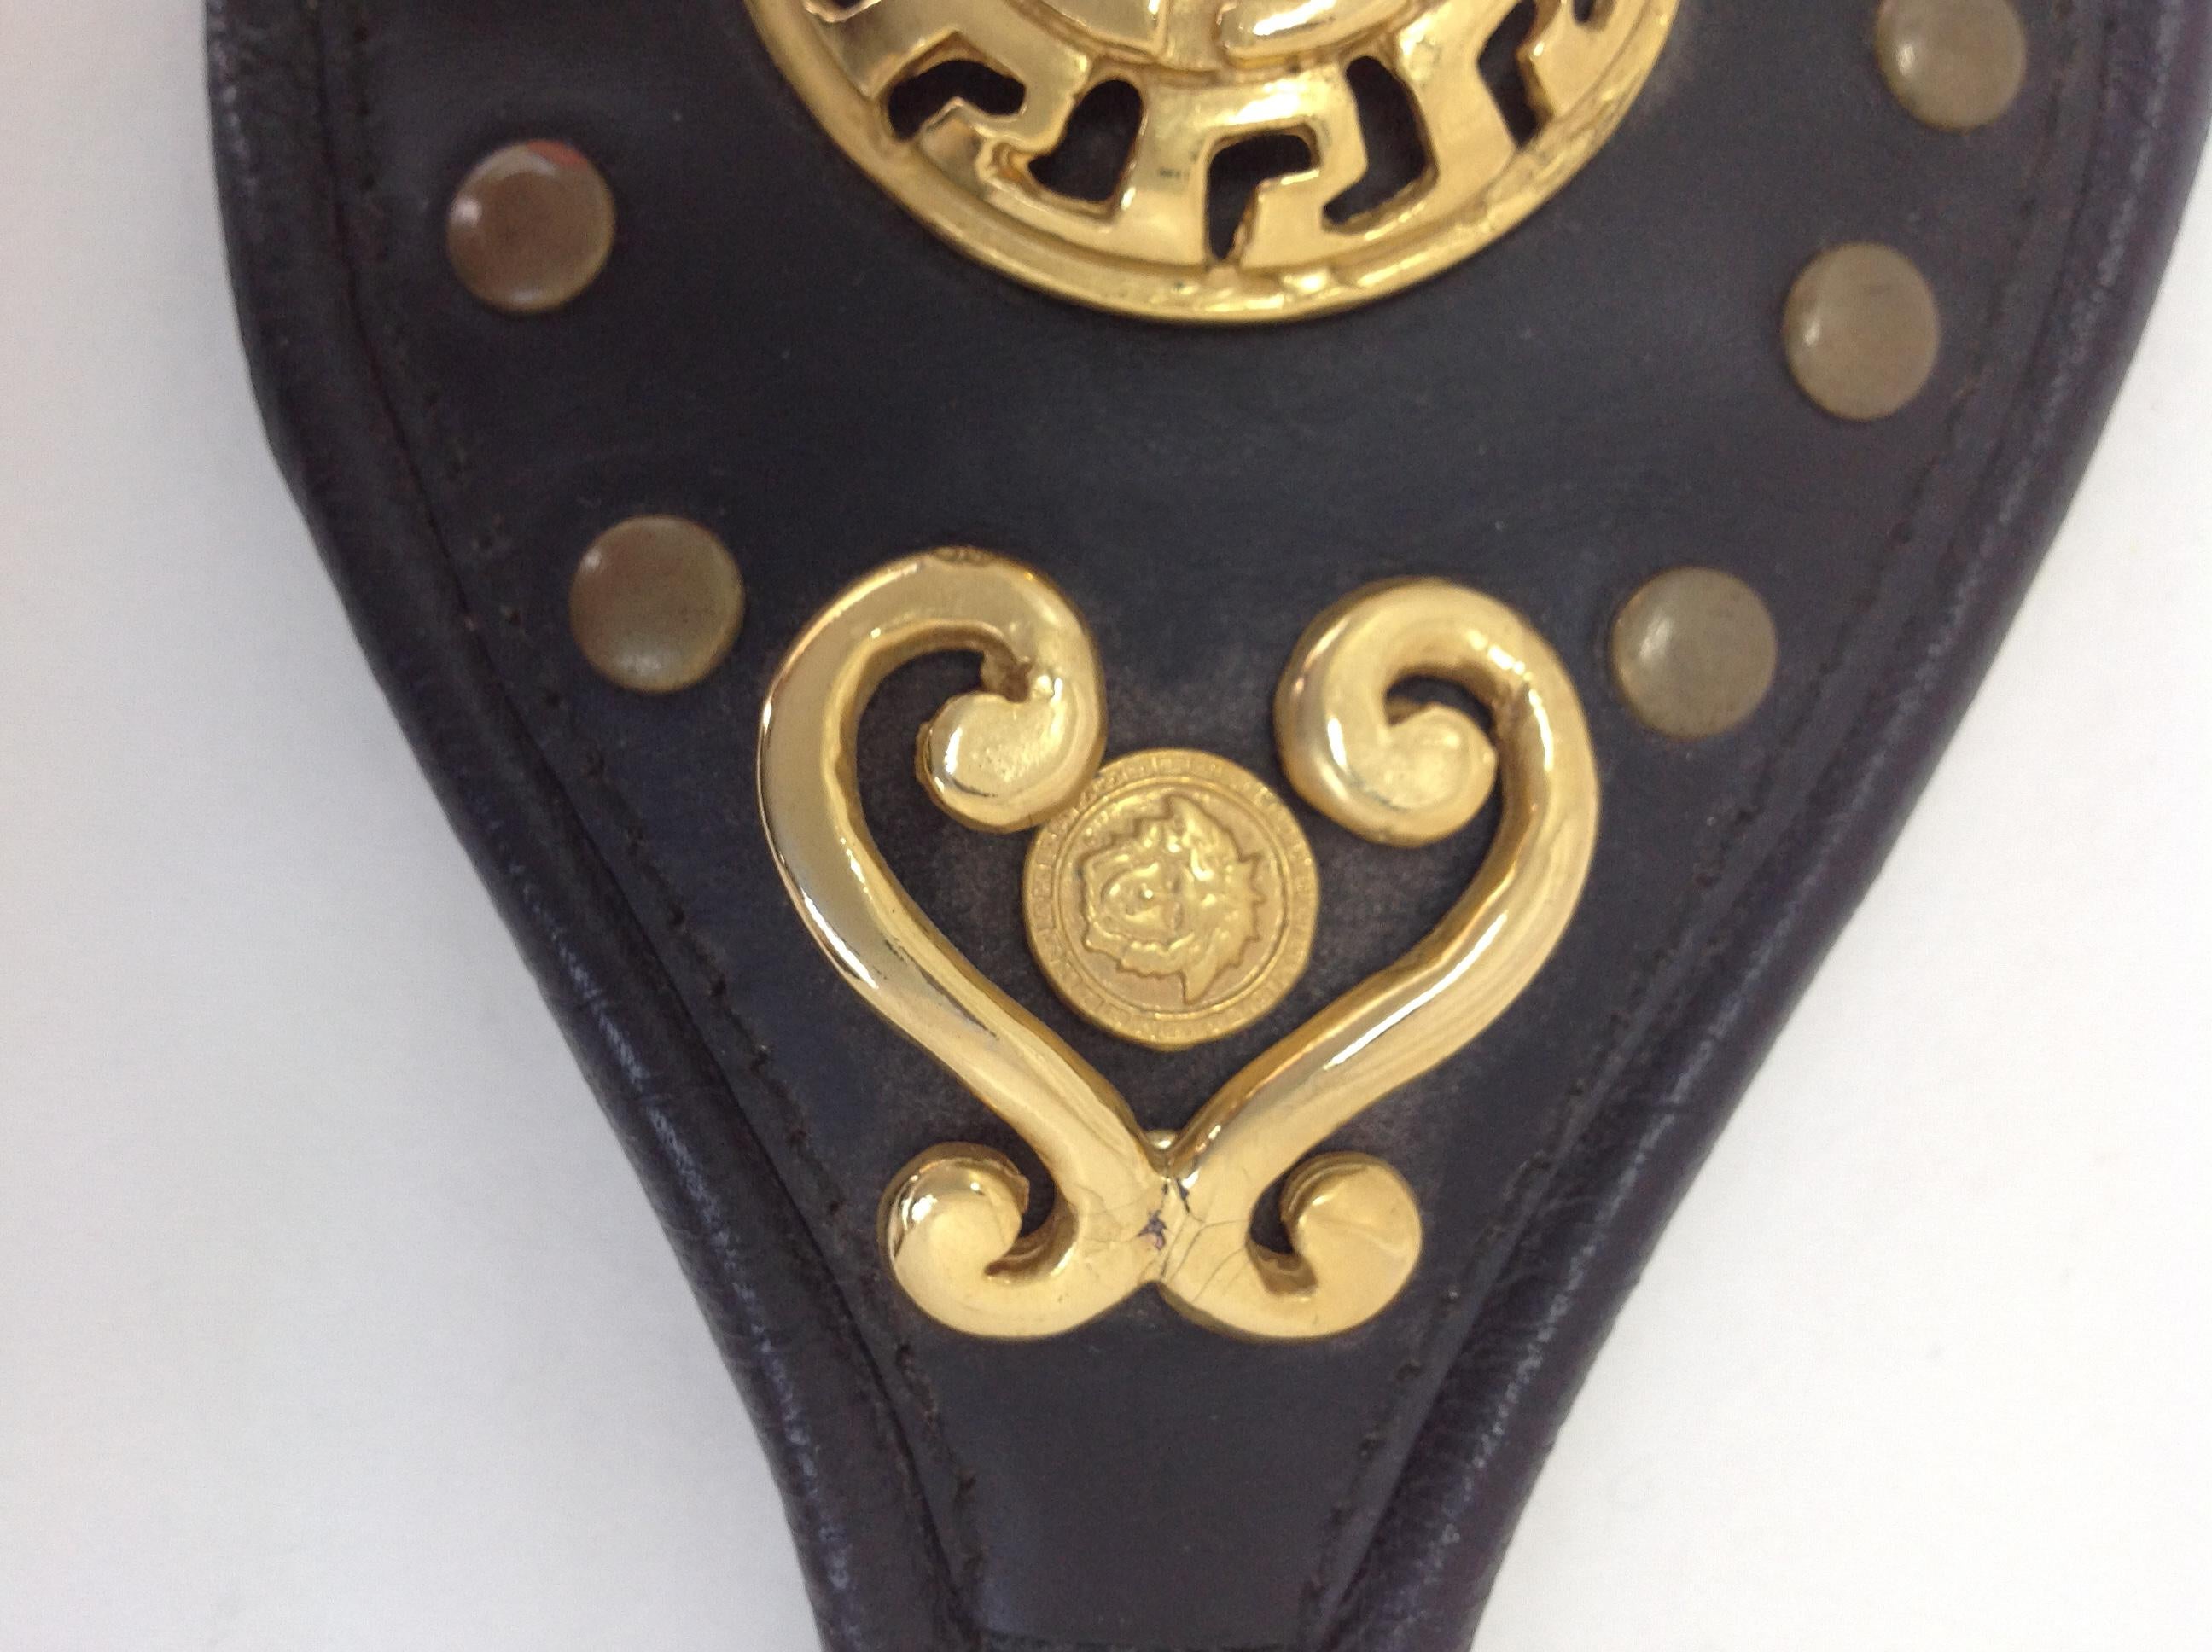 GIANNI VERSACE Bracelet Vintage 1990s Leather Cuff Miami Collection 1993 6